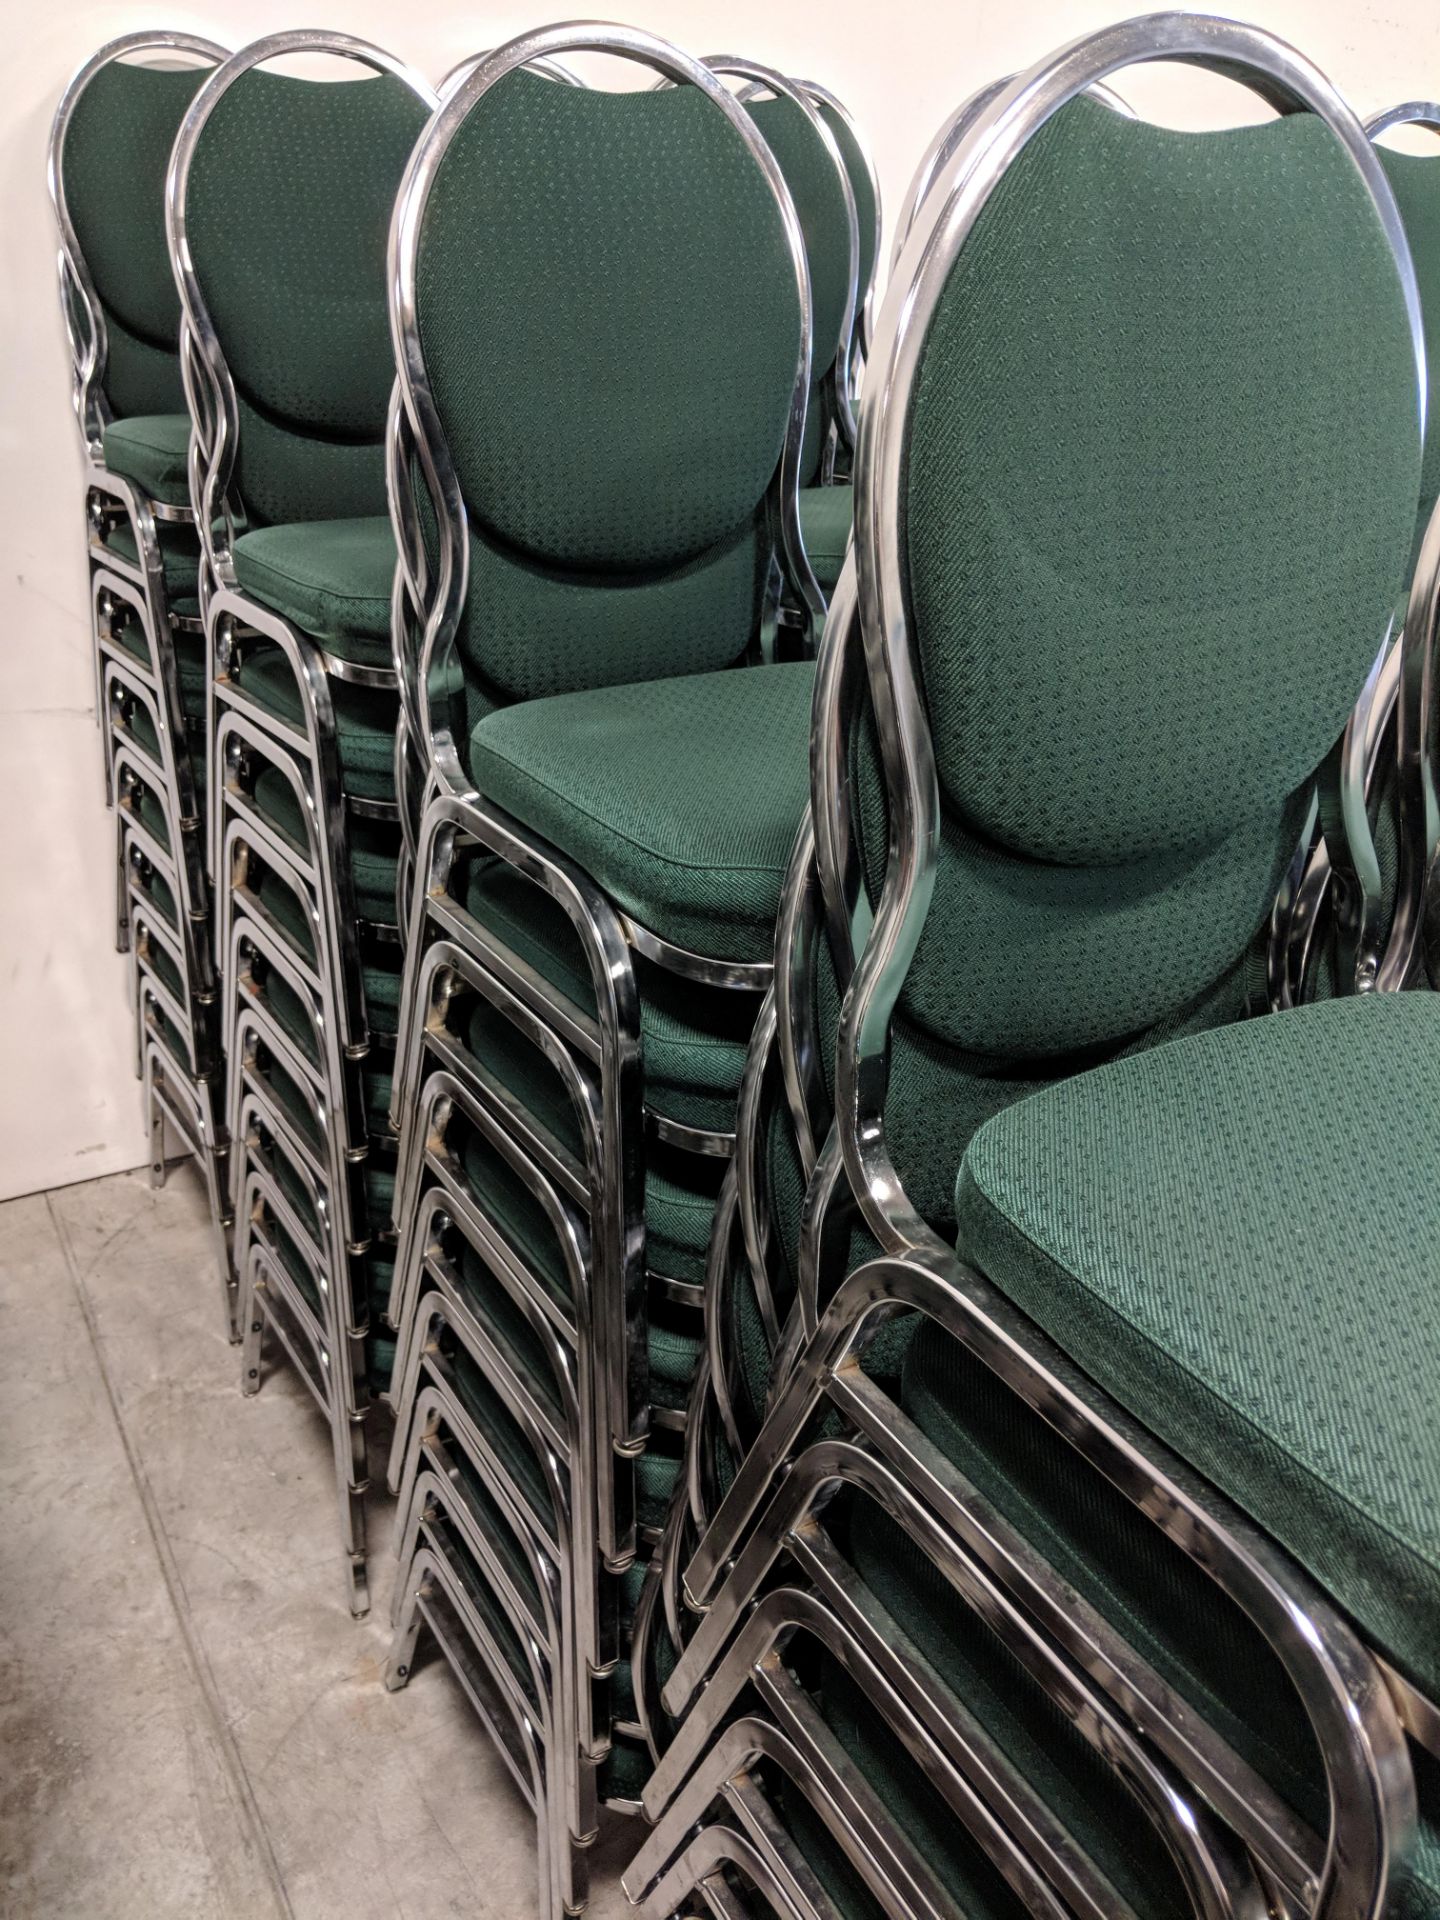 Green Stacking Chairs - Lot of 105 - Image 4 of 8